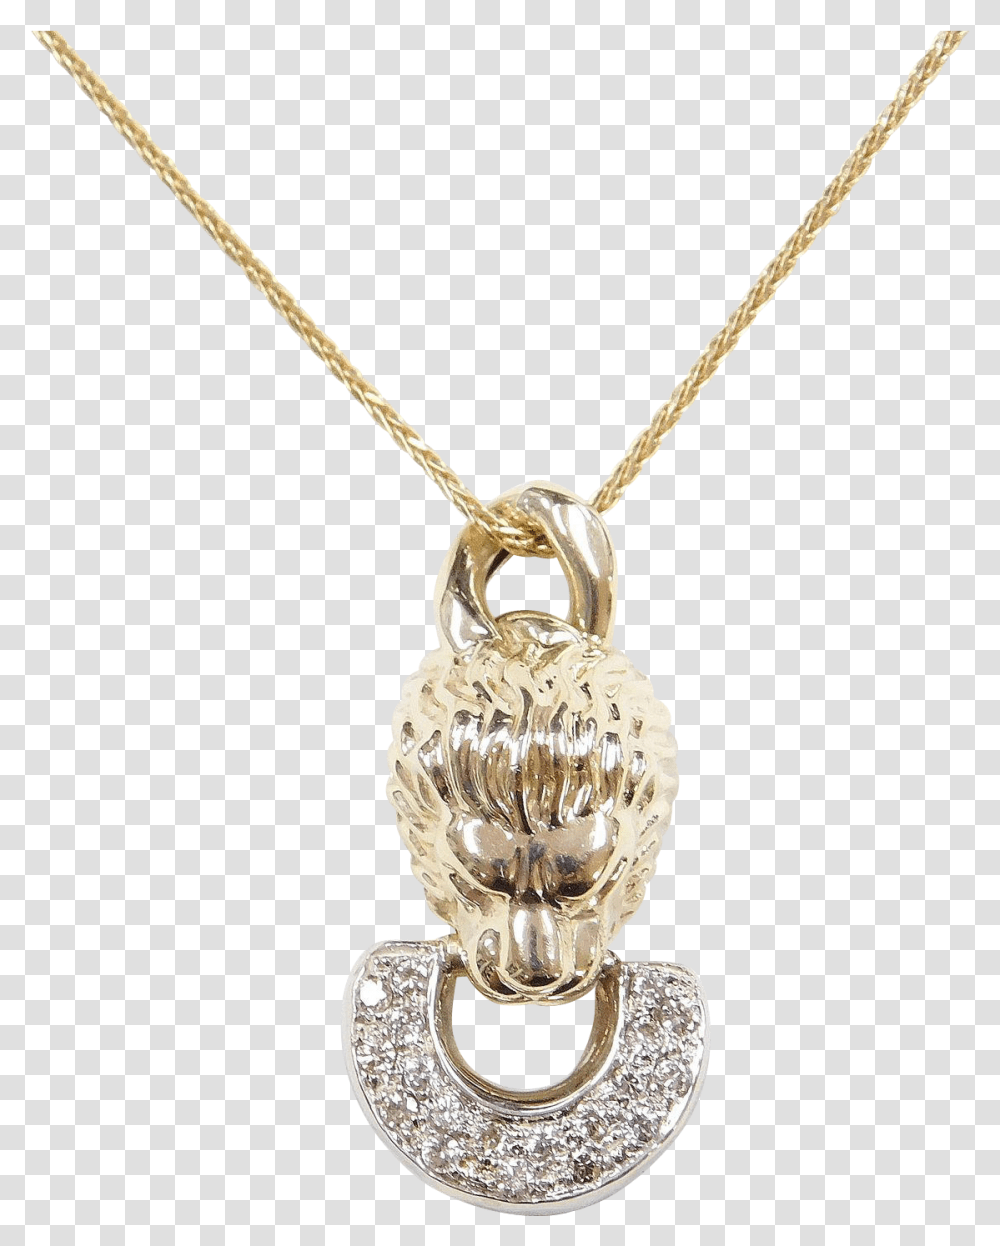 Necklace Locket Gold Jewellery Charms Amp Pendants Locket, Jewelry, Accessories, Accessory Transparent Png